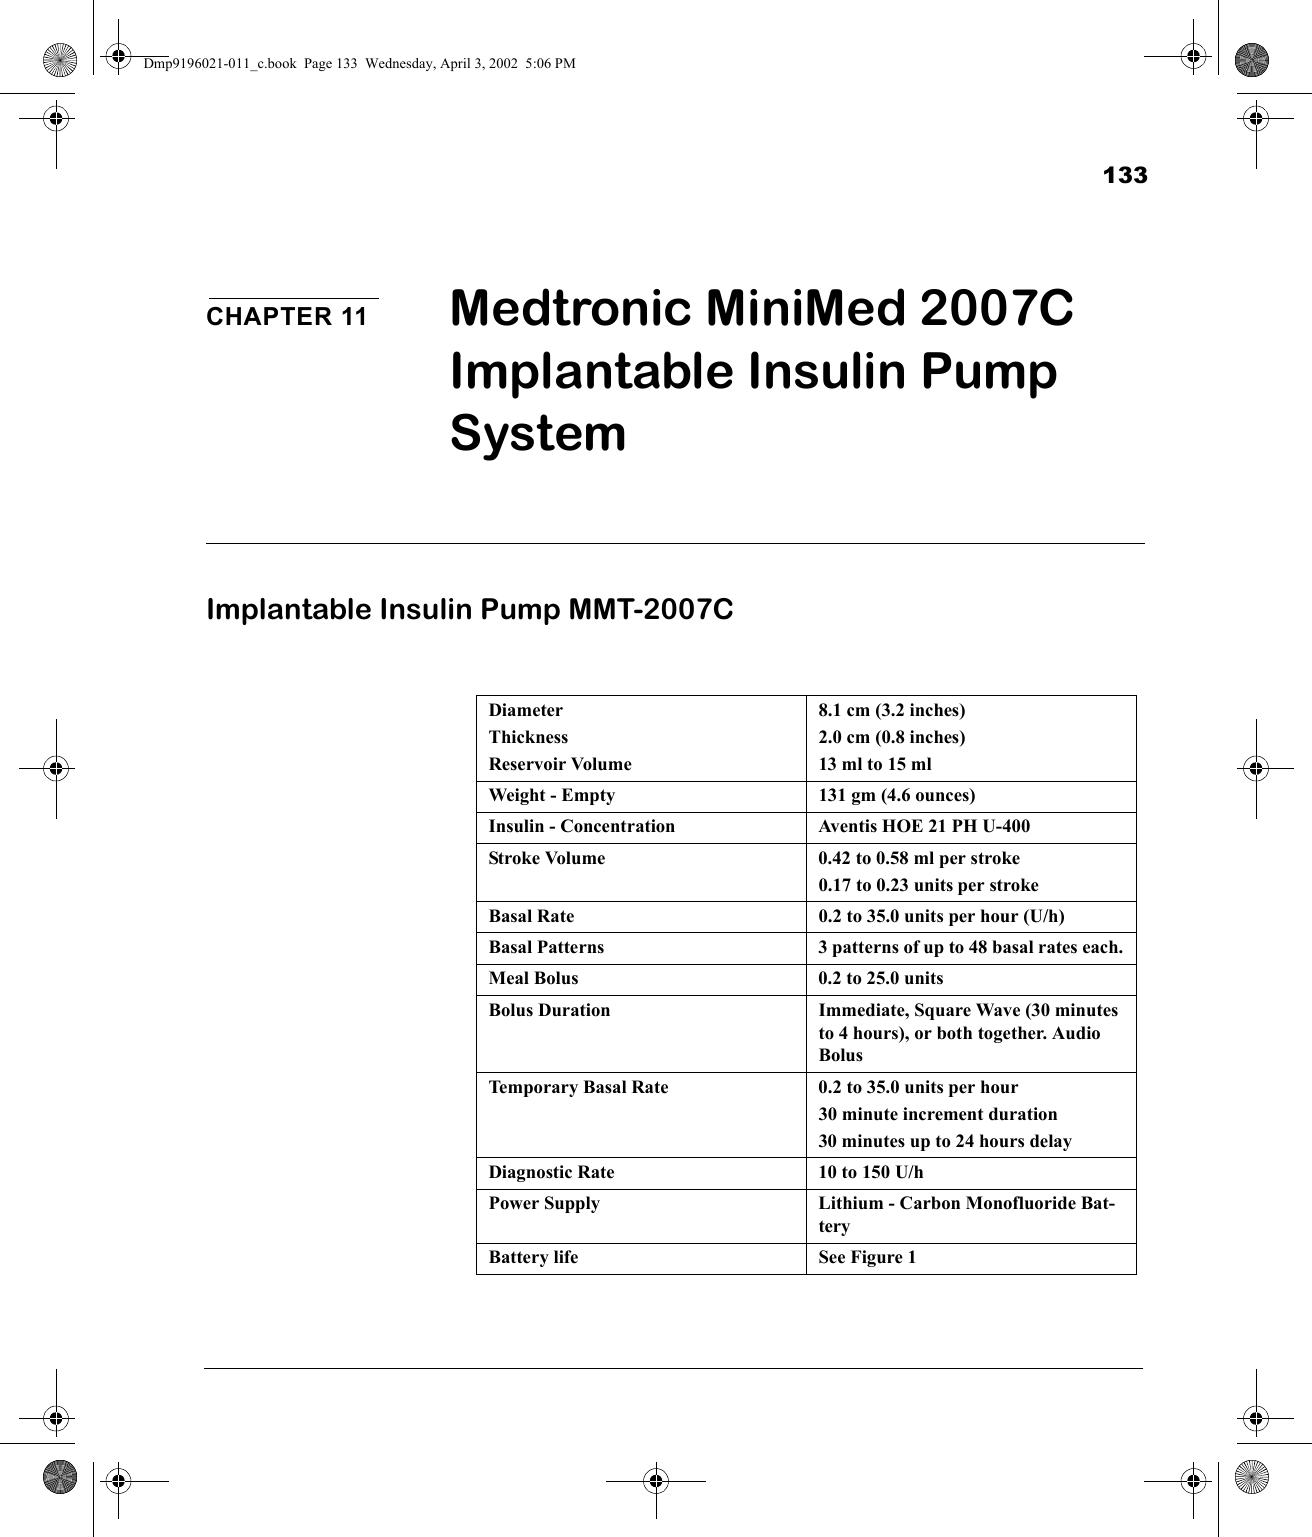 133CHAPTER 11 Medtronic MiniMed 2007C Implantable Insulin Pump SystemImplantable Insulin Pump MMT-2007CDiameterThicknessReservoir Volume8.1 cm (3.2 inches)2.0 cm (0.8 inches)13 ml to 15 mlWeight - Empty 131 gm (4.6 ounces)Insulin - Concentration Aventis HOE 21 PH U-400Stroke Volume 0.42 to 0.58 ml per stroke0.17 to 0.23 units per strokeBasal Rate 0.2 to 35.0 units per hour (U/h)Basal Patterns 3 patterns of up to 48 basal rates each.Meal Bolus  0.2 to 25.0 unitsBolus Duration Immediate, Square Wave (30 minutes to 4 hours), or both together. Audio Bolus Temporary Basal Rate 0.2 to 35.0 units per hour30 minute increment duration30 minutes up to 24 hours delayDiagnostic Rate 10 to 150 U/hPower Supply Lithium - Carbon Monofluoride Bat-teryBattery life See Figure 1Dmp9196021-011_c.book  Page 133  Wednesday, April 3, 2002  5:06 PM